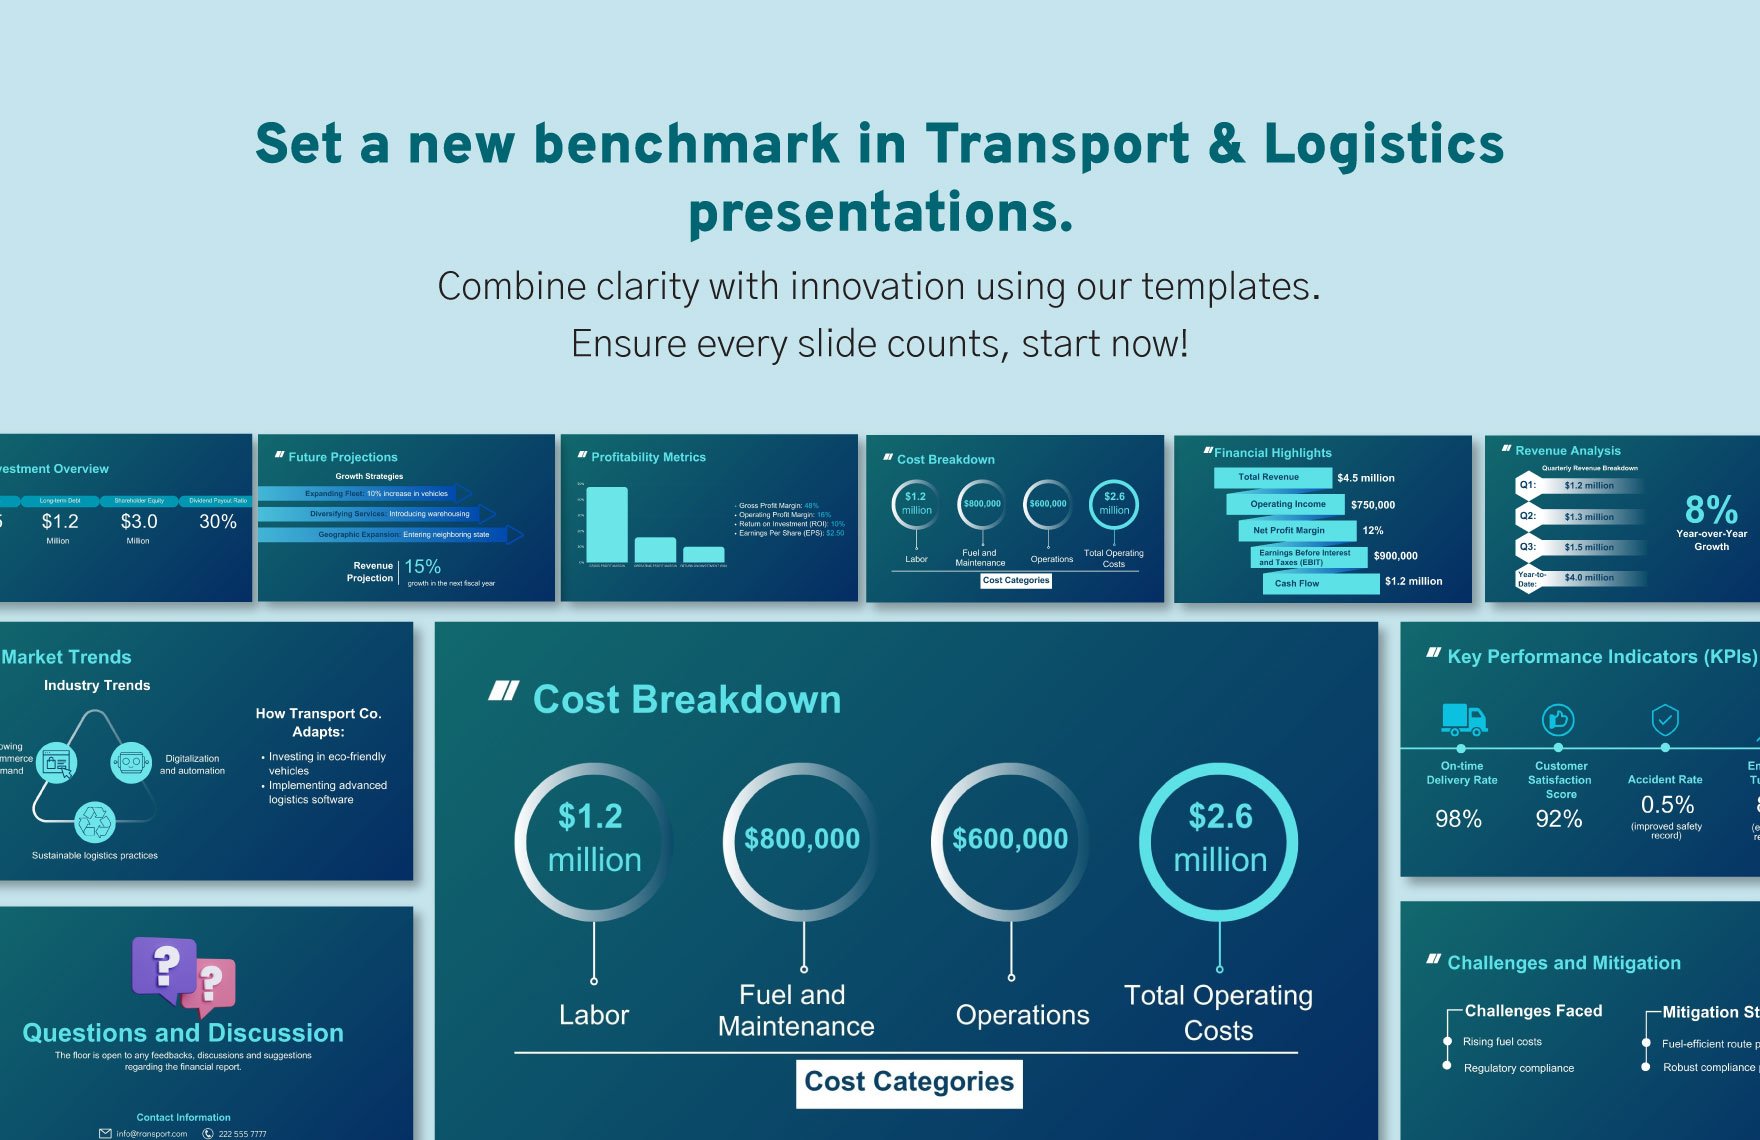 Transport and Logistics Board Meeting Financial Report Presentation Template